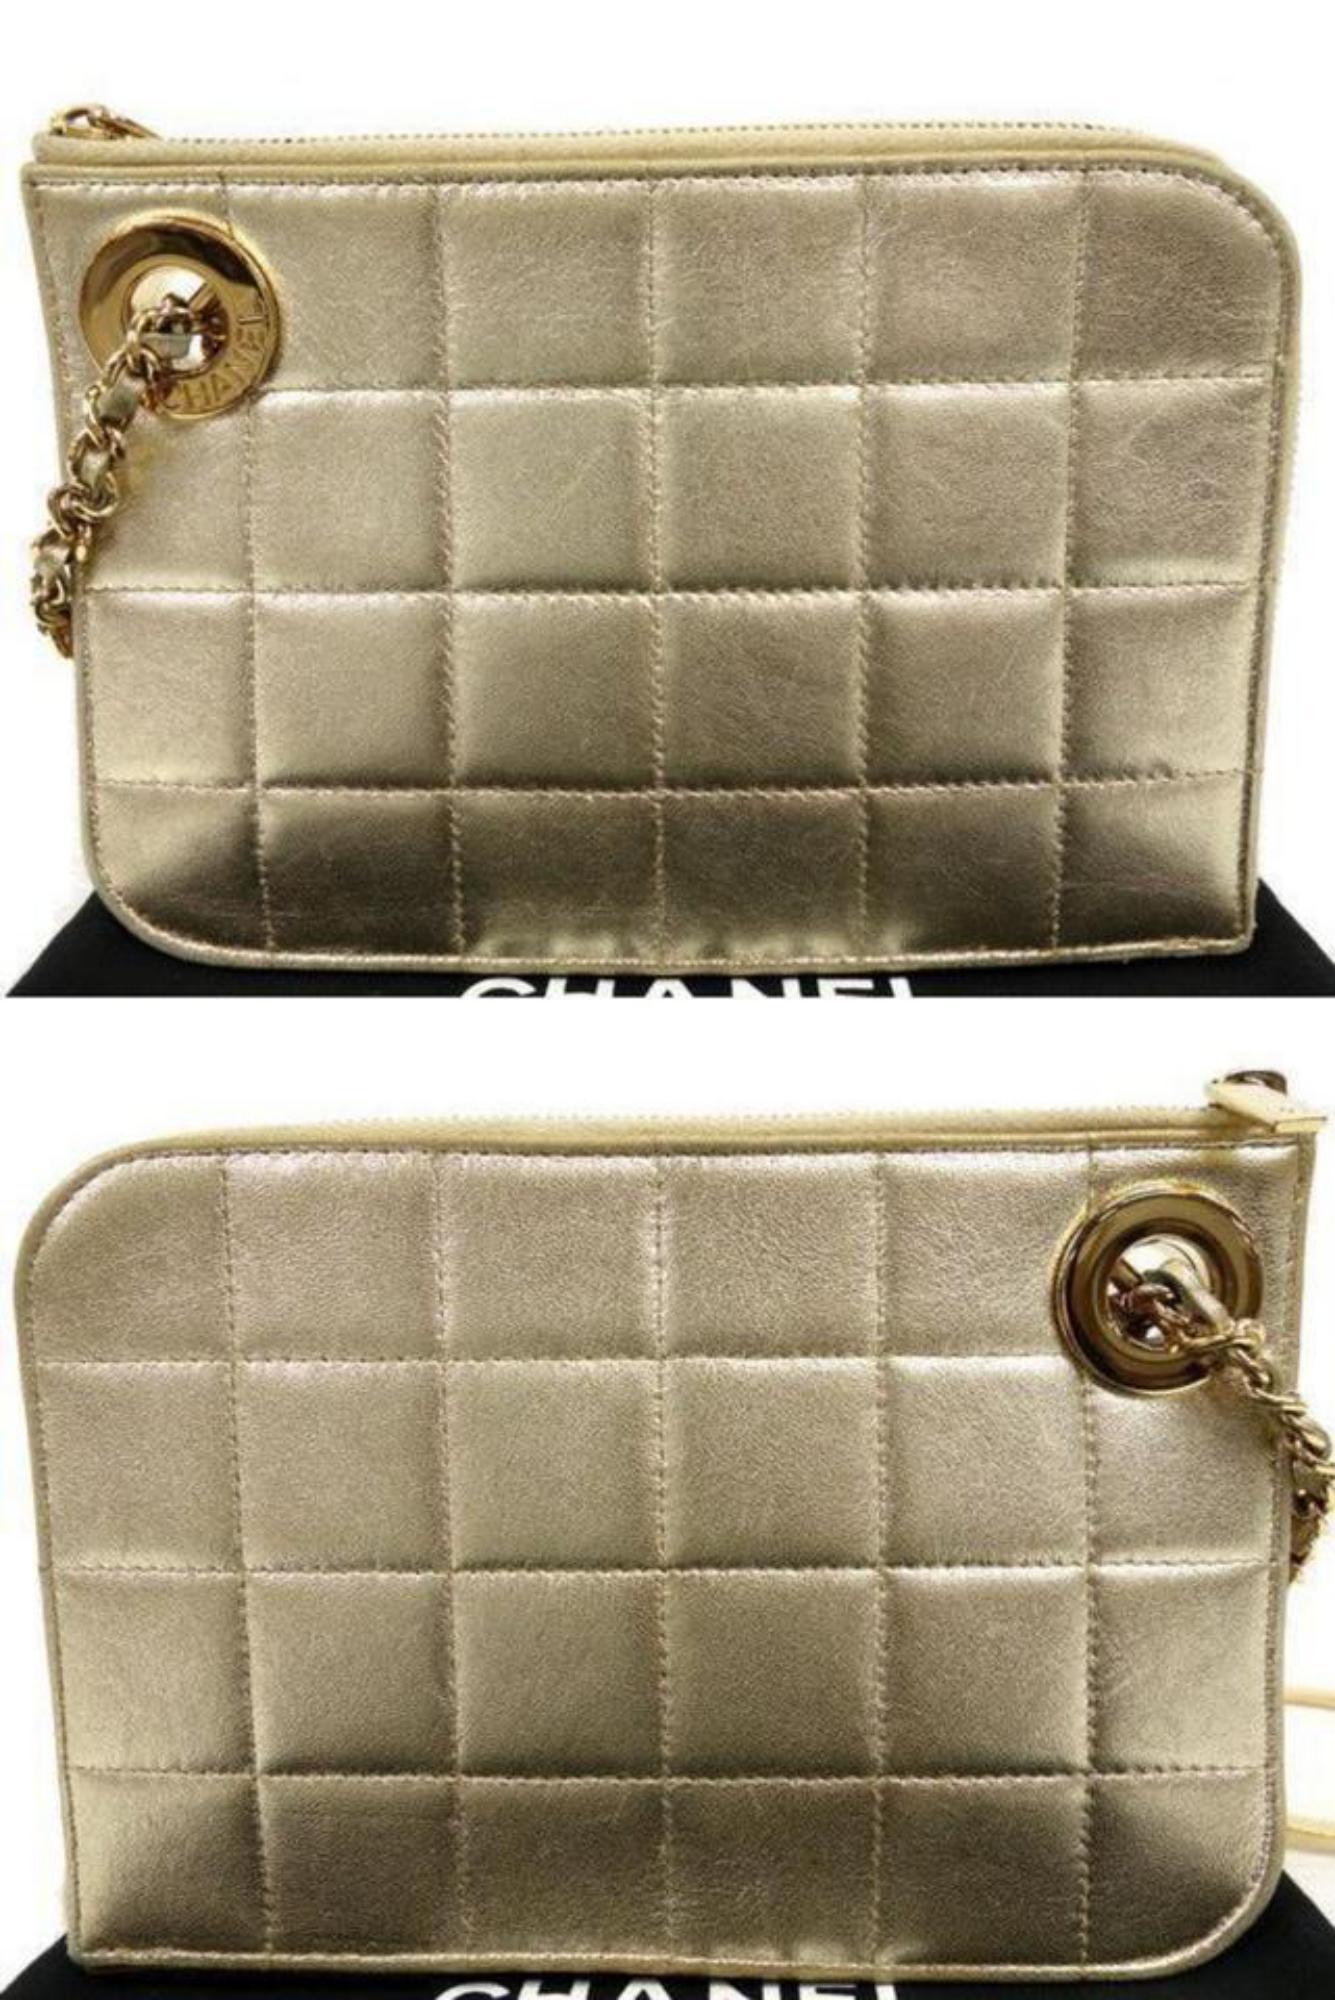 Chanel Clutch Chocolate Bar Handcuff Pochette 233769 Gold Leather Wristlet For Sale 1